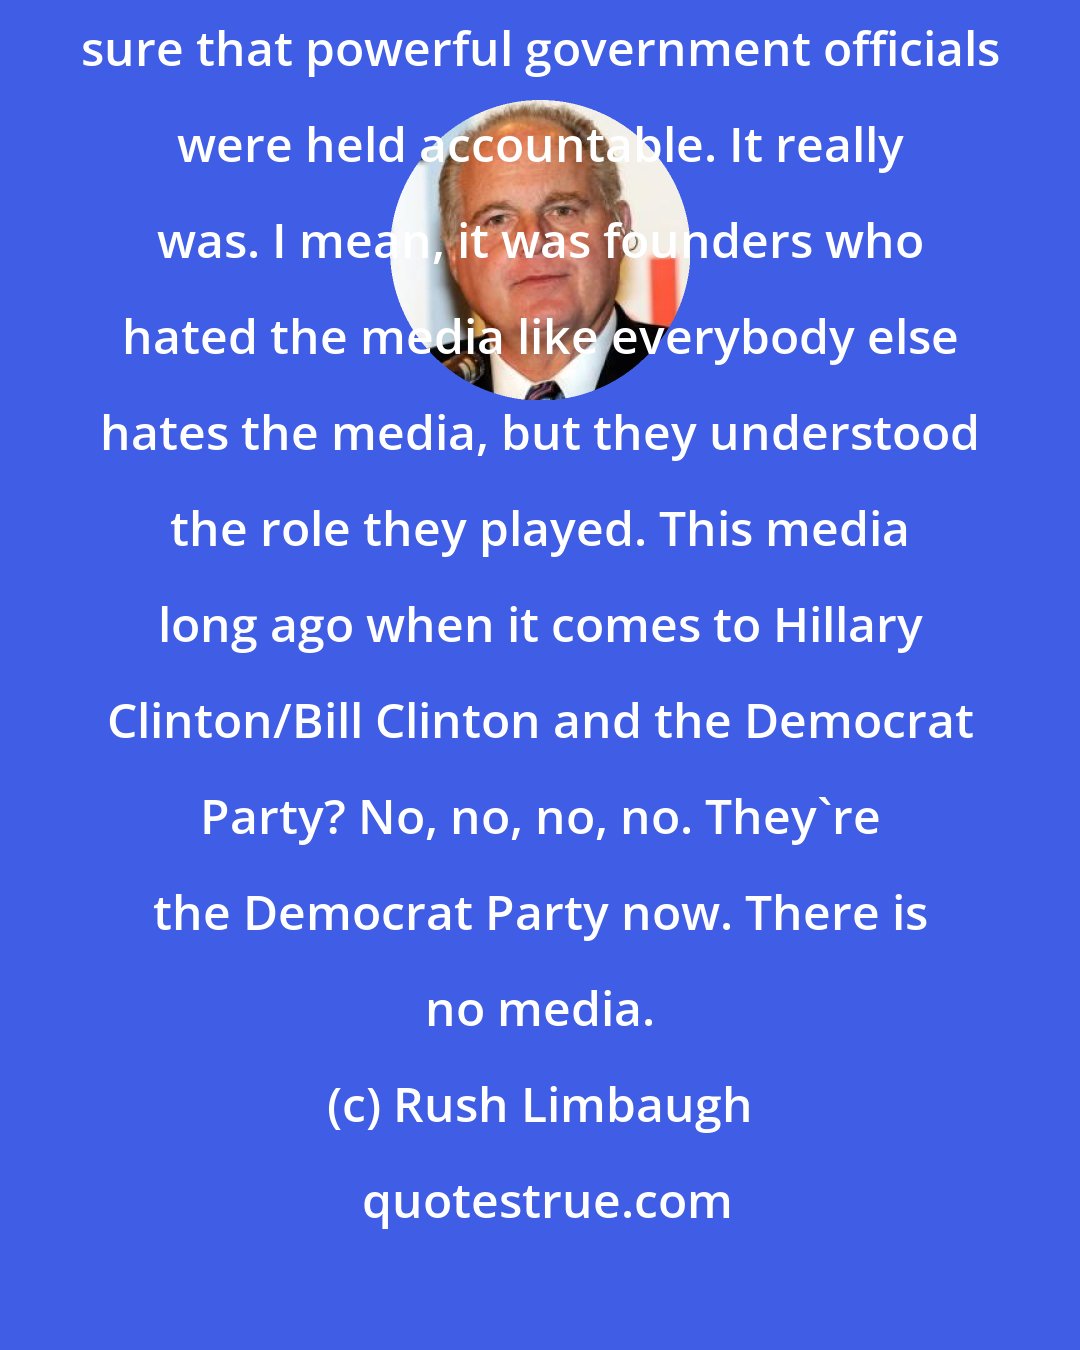 Rush Limbaugh: In the founding days of the Constitution, the purpose of the media was to make sure that powerful government officials were held accountable. It really was. I mean, it was founders who hated the media like everybody else hates the media, but they understood the role they played. This media long ago when it comes to Hillary Clinton/Bill Clinton and the Democrat Party? No, no, no, no. They're the Democrat Party now. There is no media.